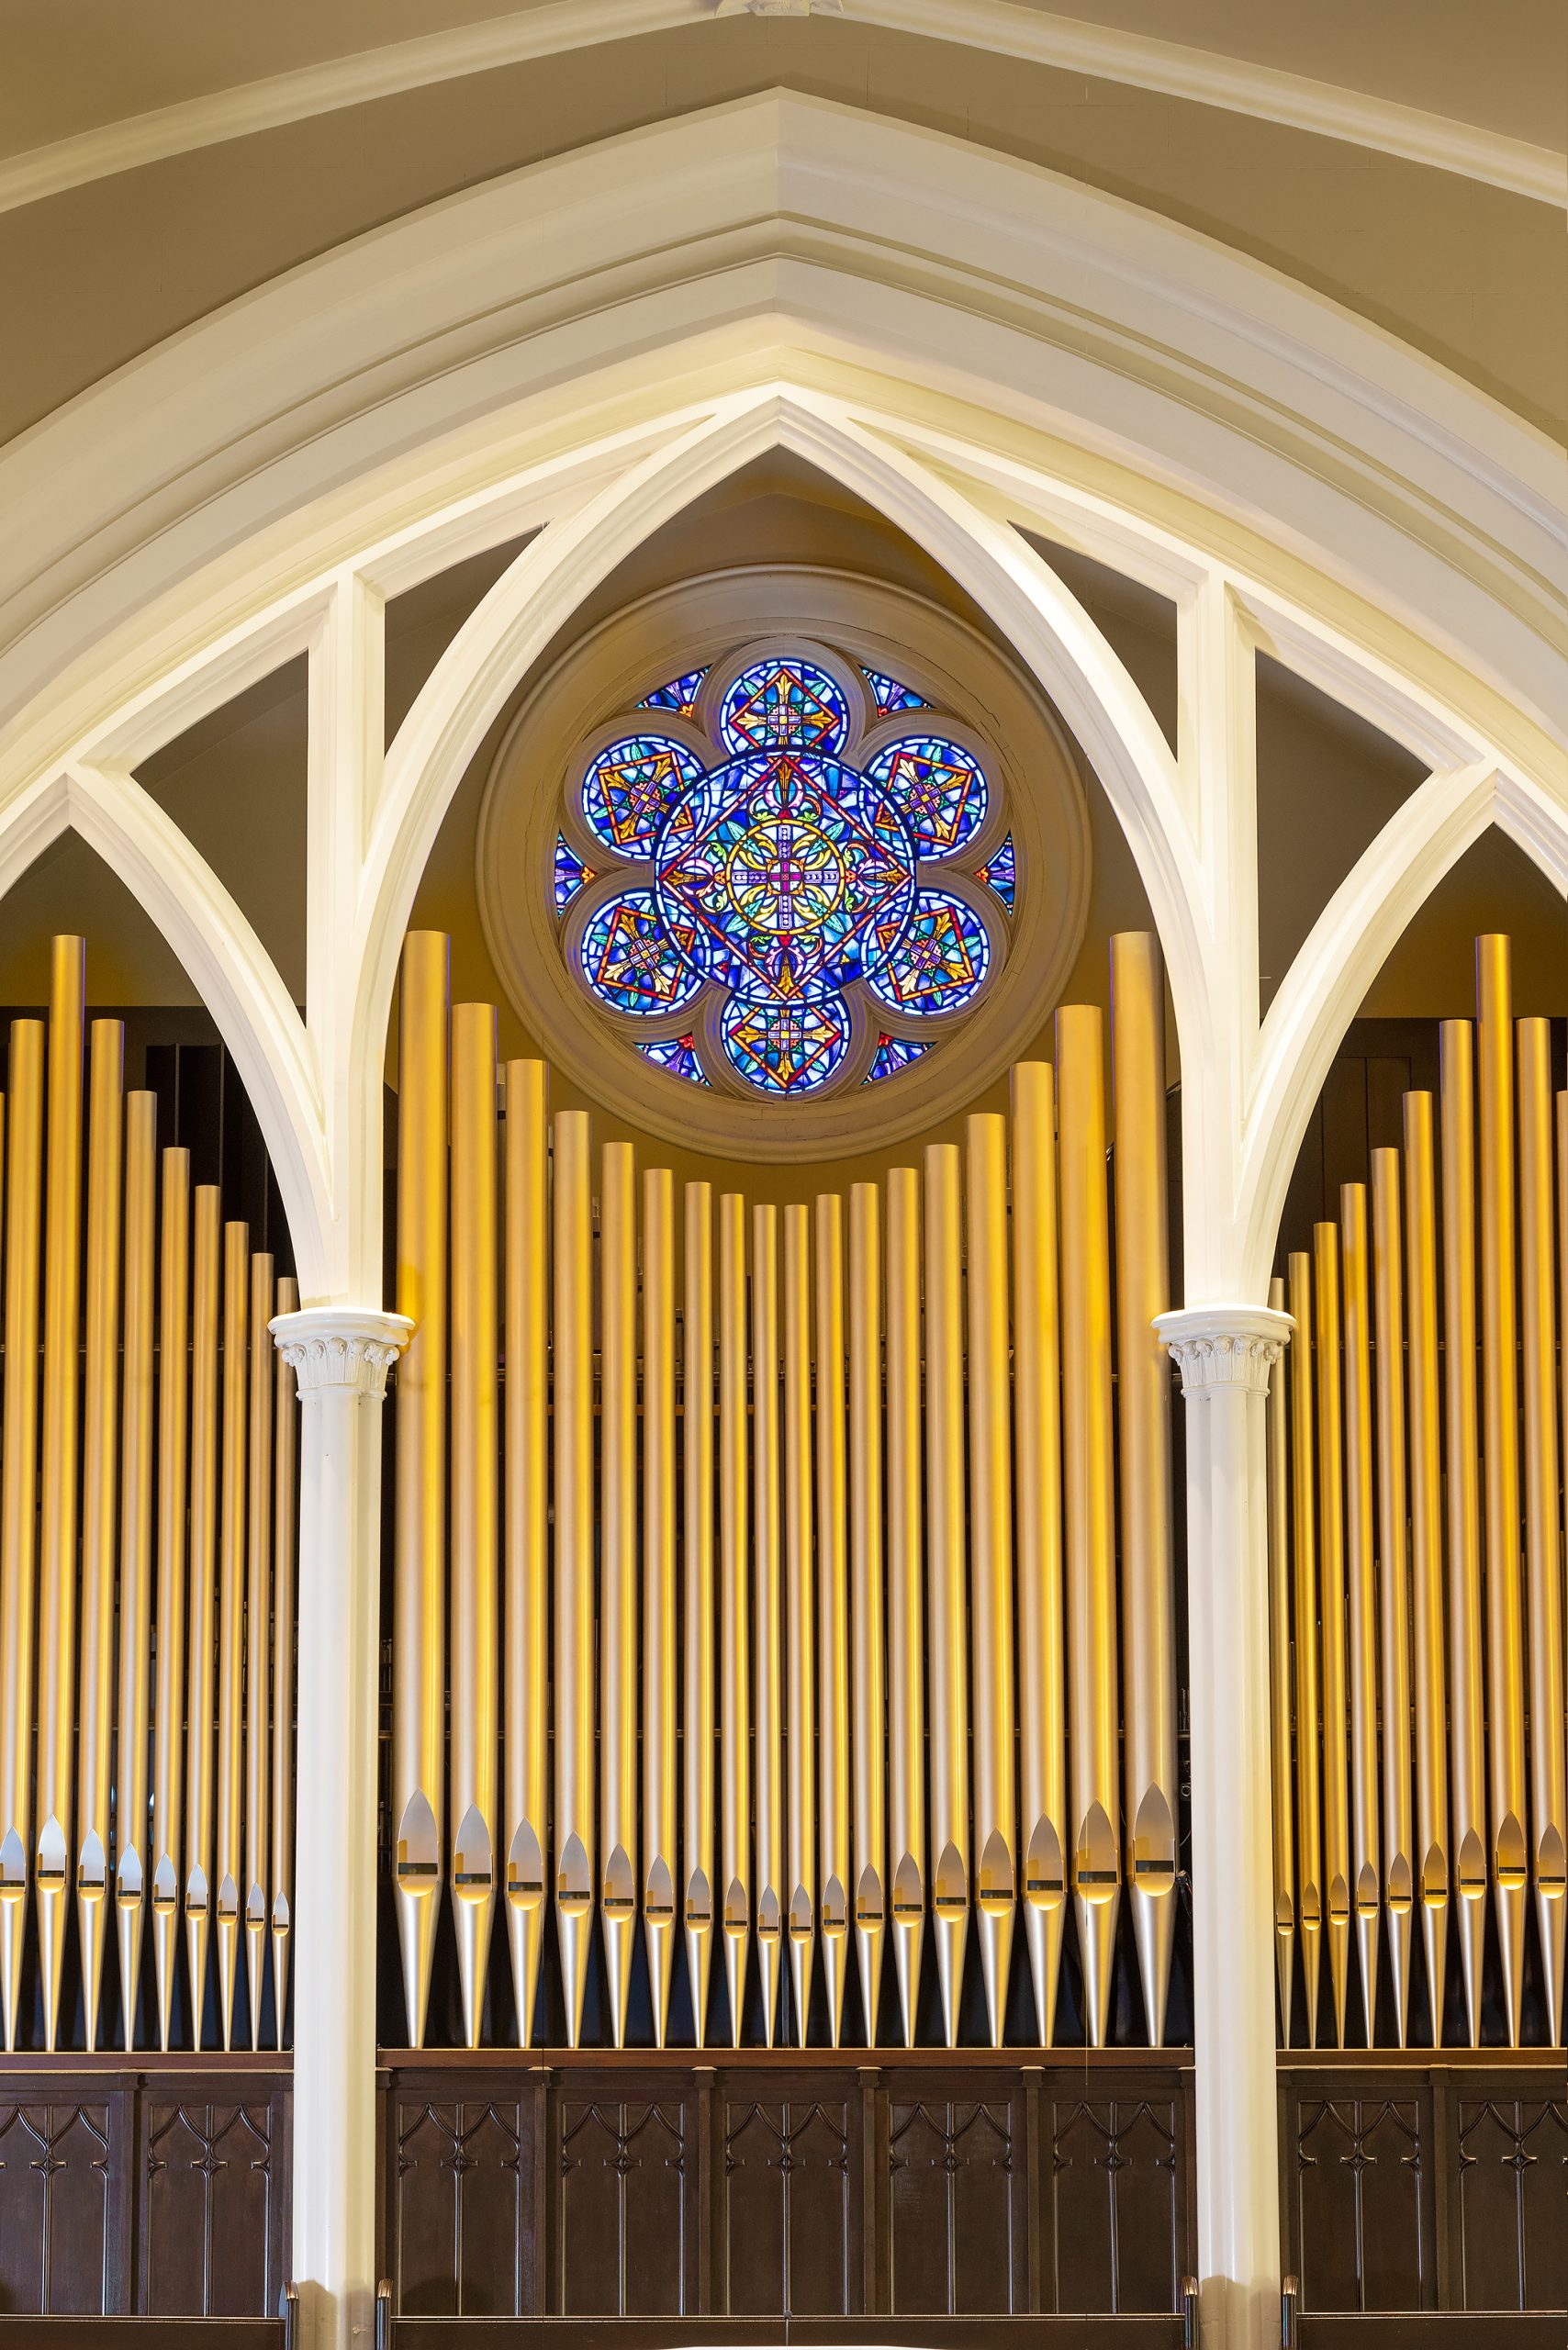 In 1982, a major fire in the First Presbyterian Church sanctuary burned the organ, requiring the church to buy another Casavant organ for the rebuilt church. The current organ is a Casavant organ of 63 ranks, 4 manuals, and 3,397 pipes.